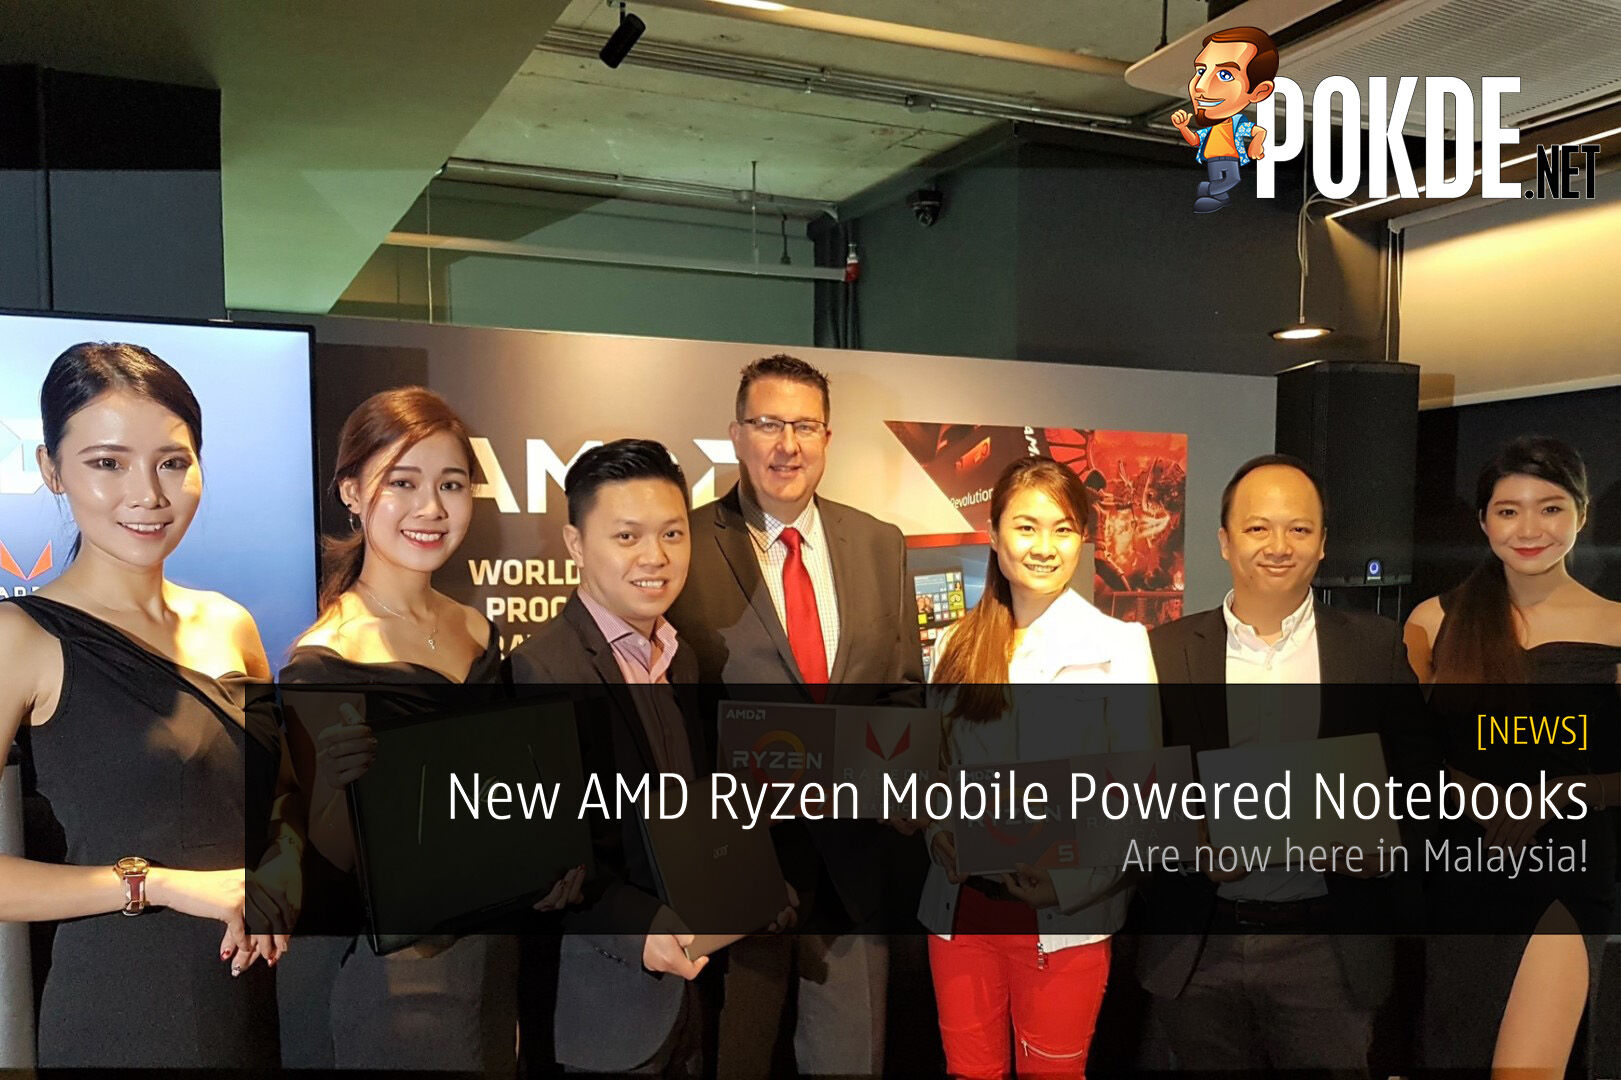 New AMD Ryzen Mobile Powered Notebooks Are Now Here in Malaysia! 35